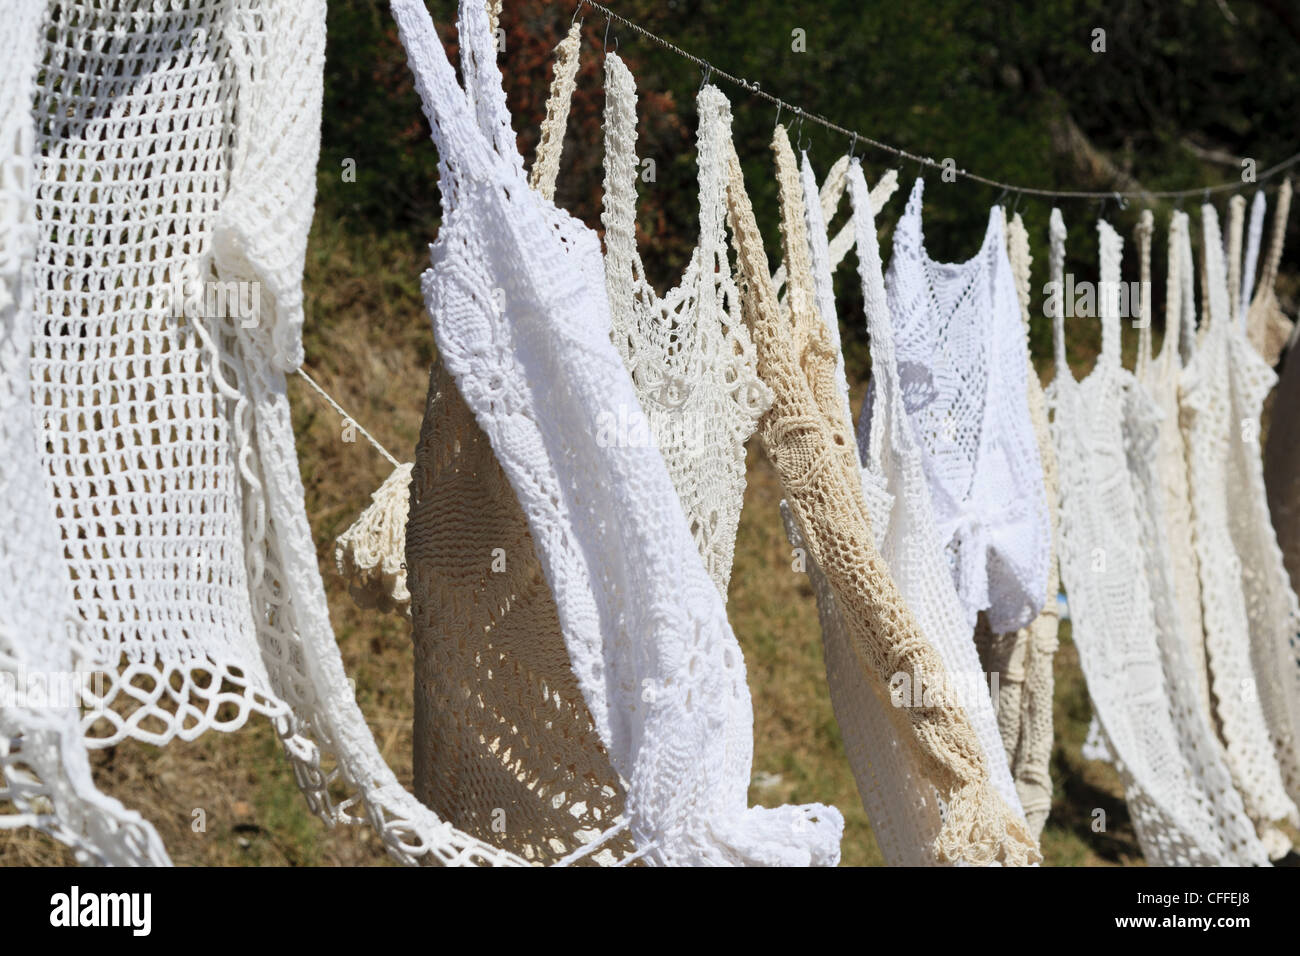 Crochet vests out to dry Stock Photo